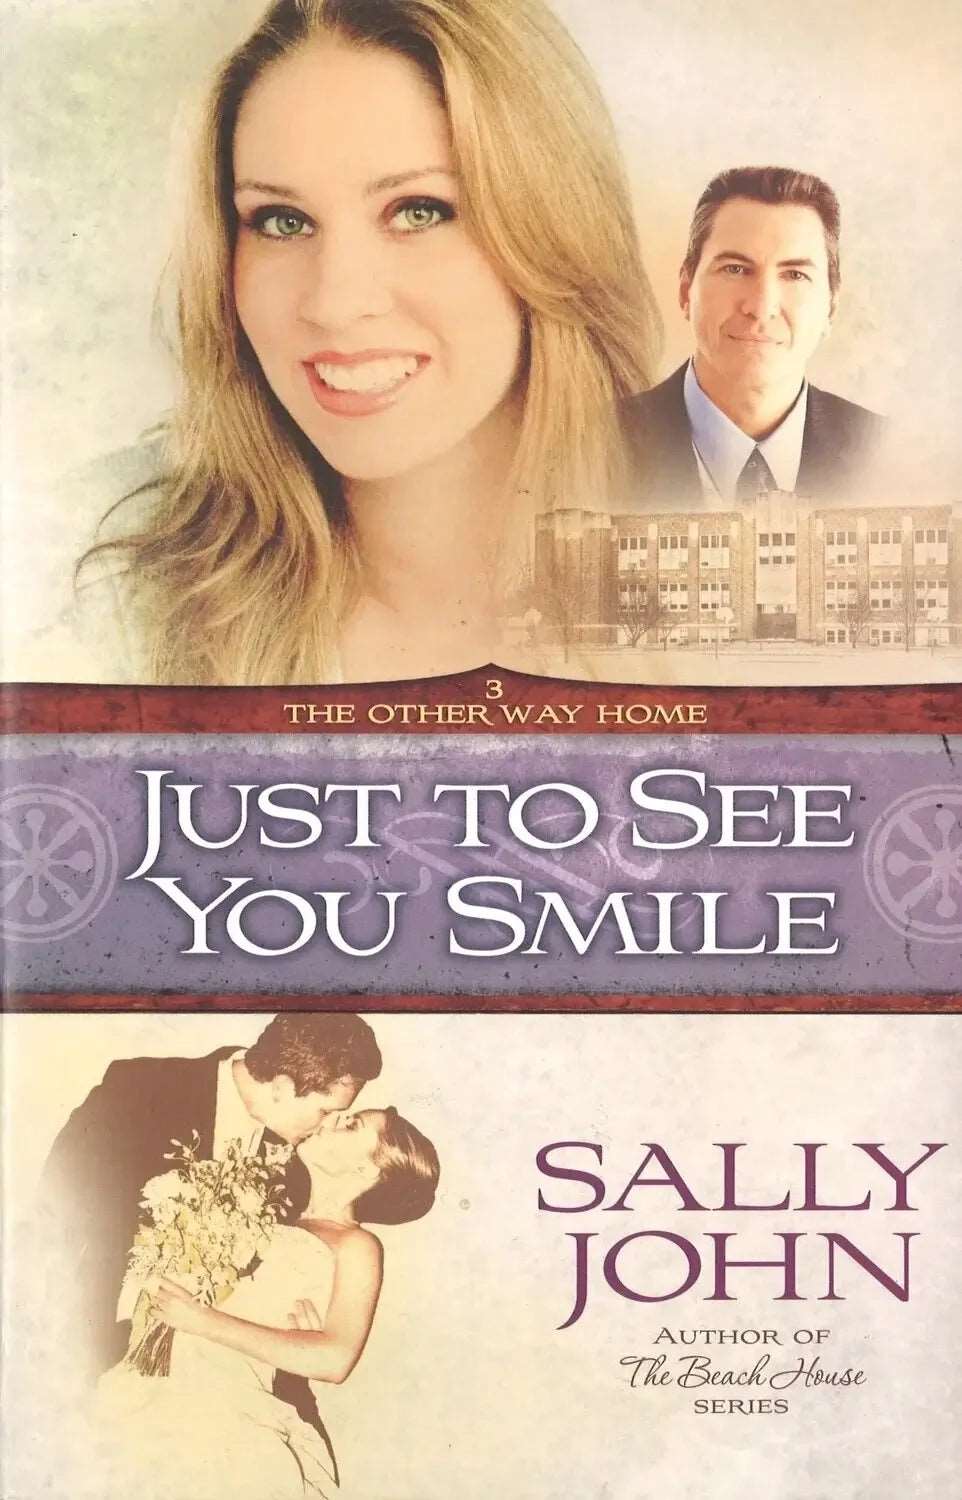 Just to See You Smile (Book 3, The Other Way Home), Sally John